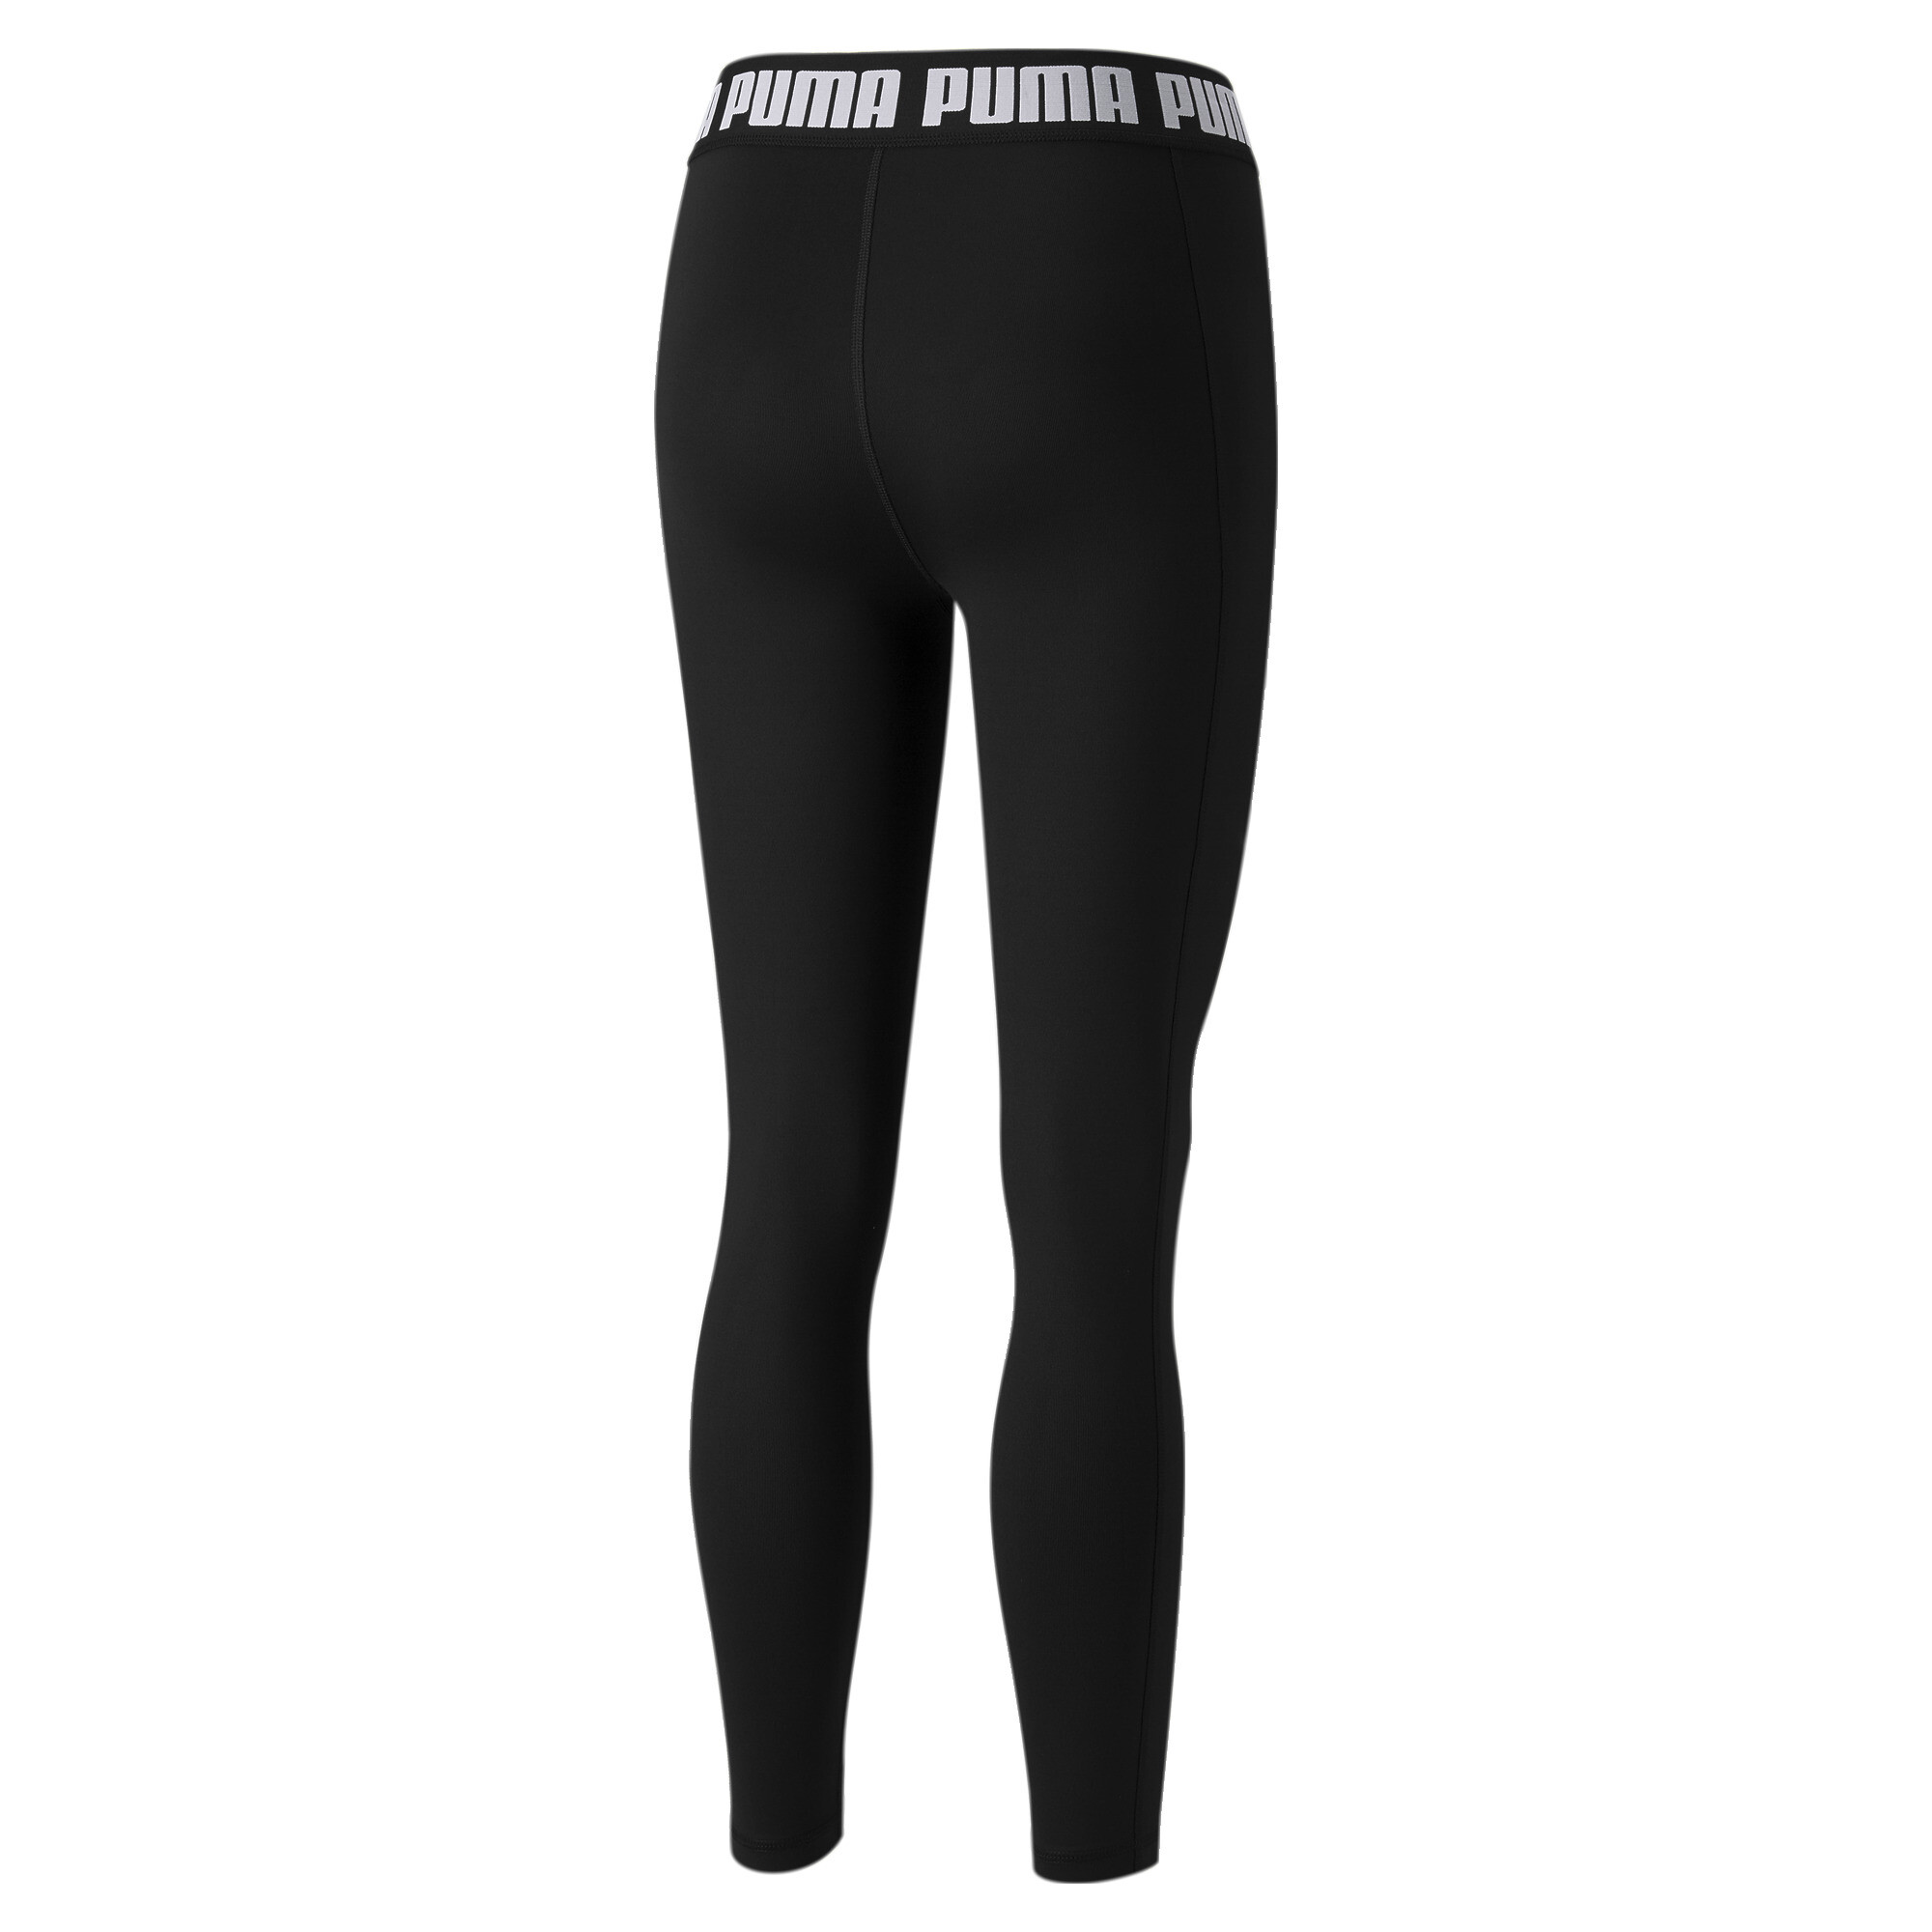 Women's PUMA Strong High Waisted Training Leggings In Black, Size XL